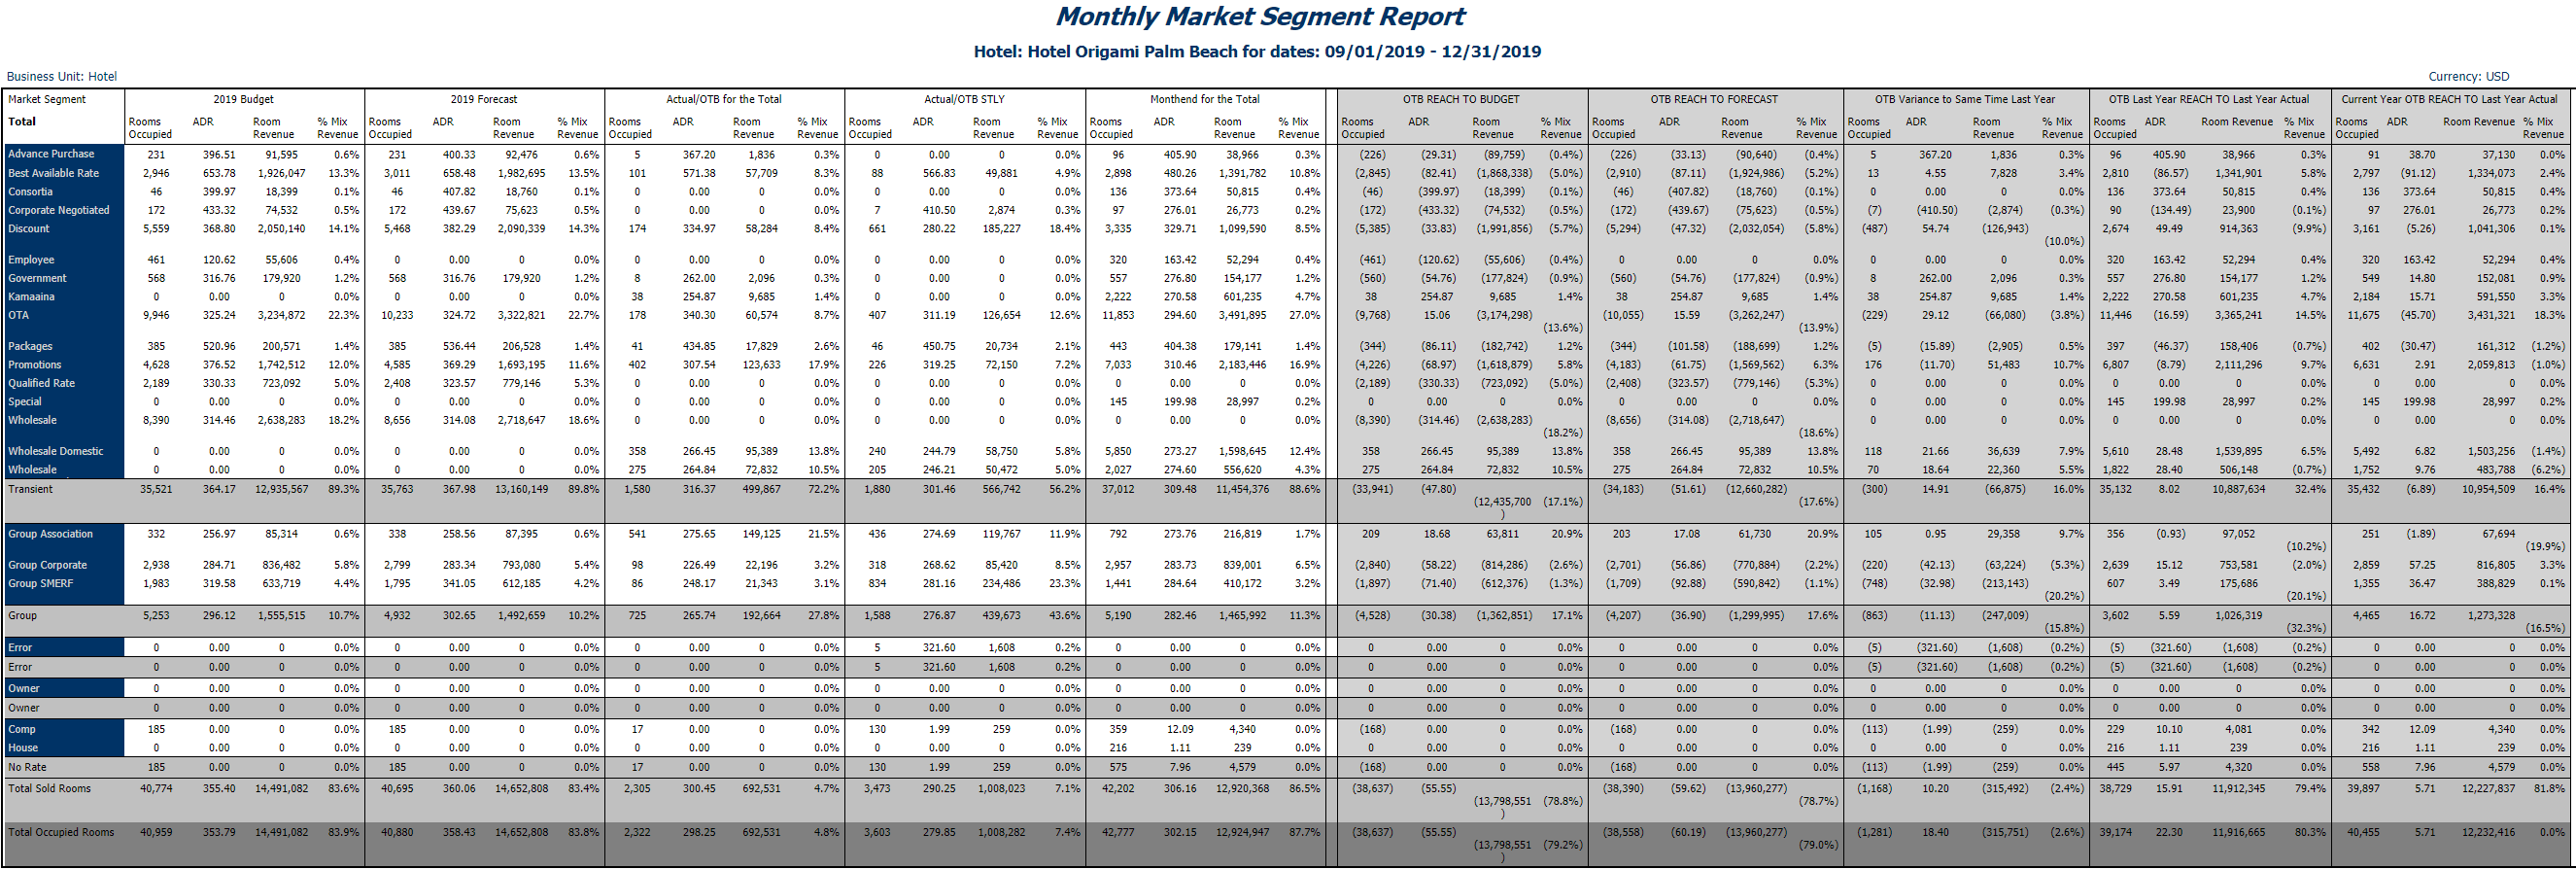 Release_Notes_Monthly_Market_Segment_Report_Totals.png